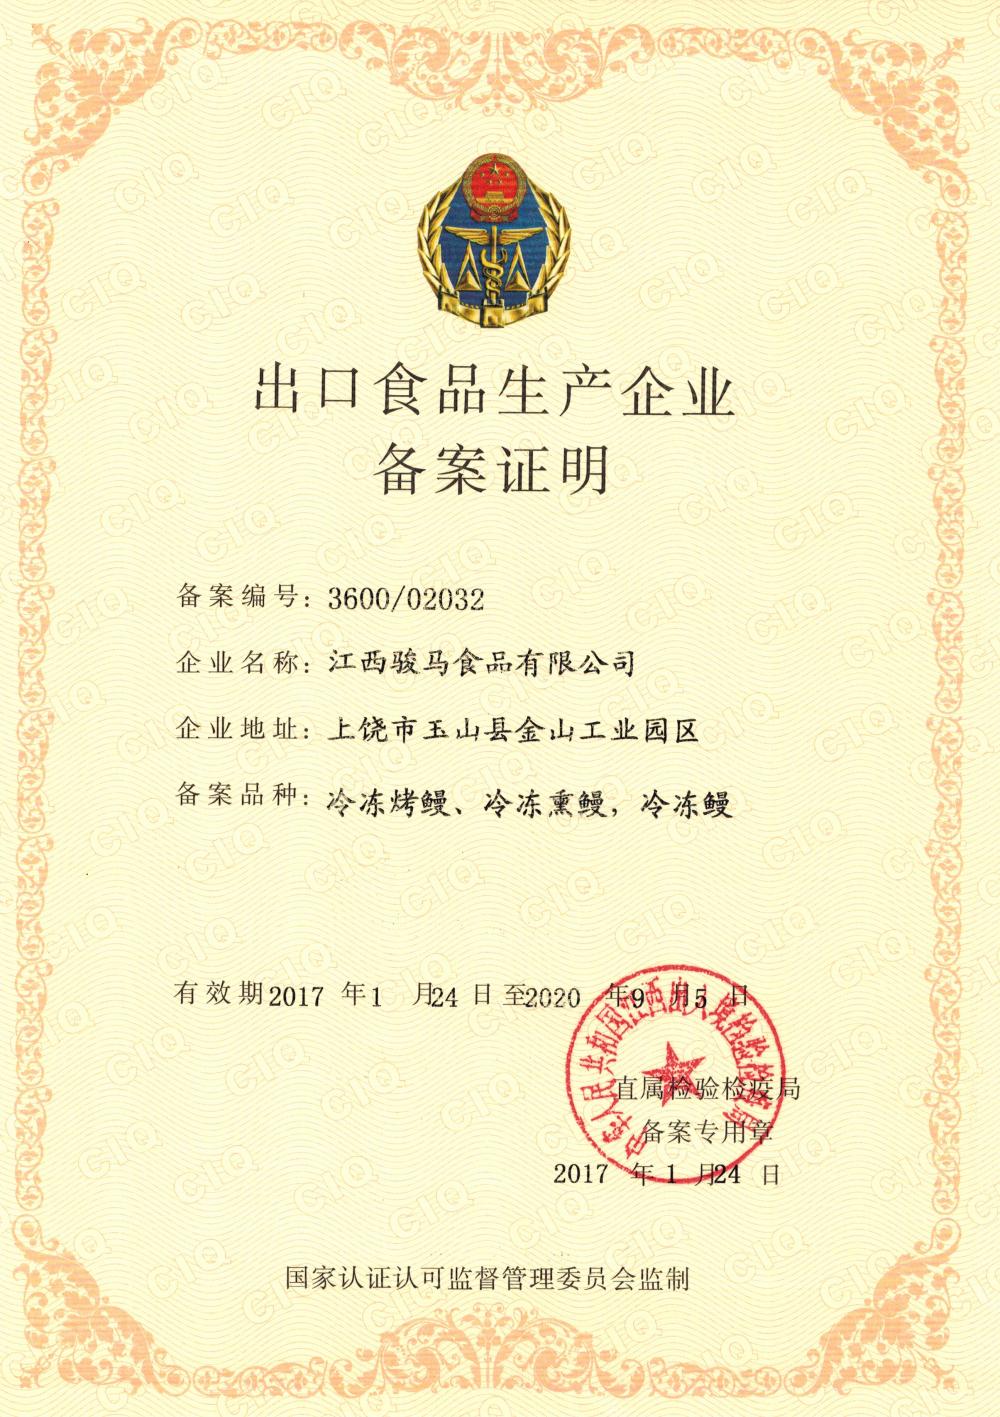 EXPORT PRODUCTION LICENSE